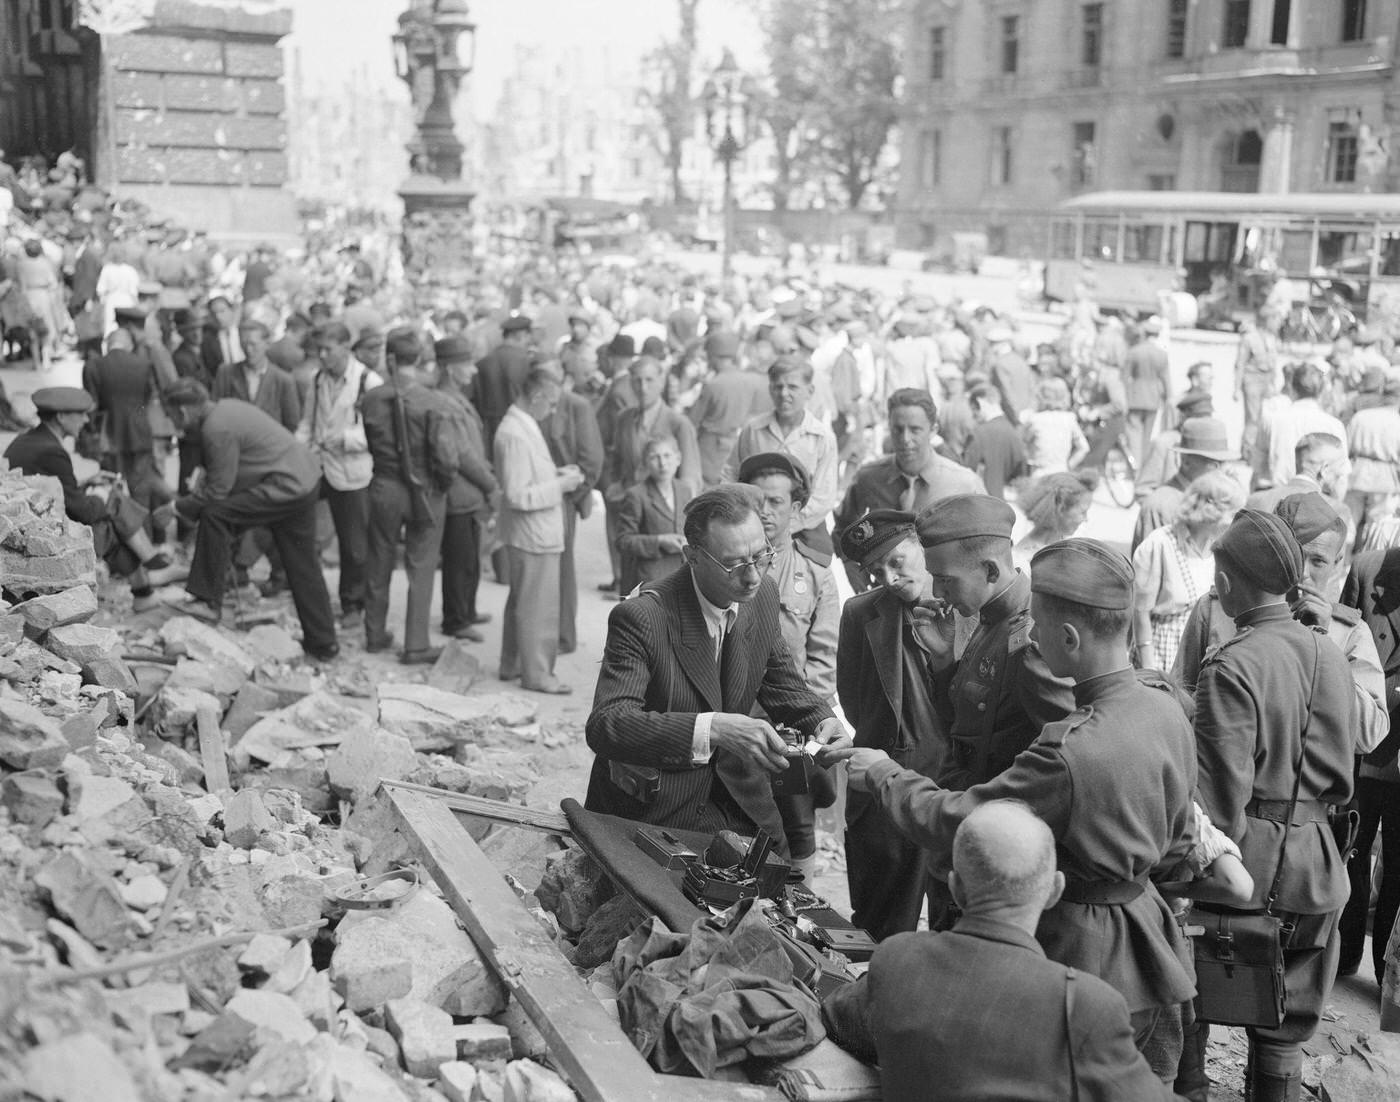 Black market flourishes in Berlin amidst the rubble, German civilians find customers among Allied soldiers.